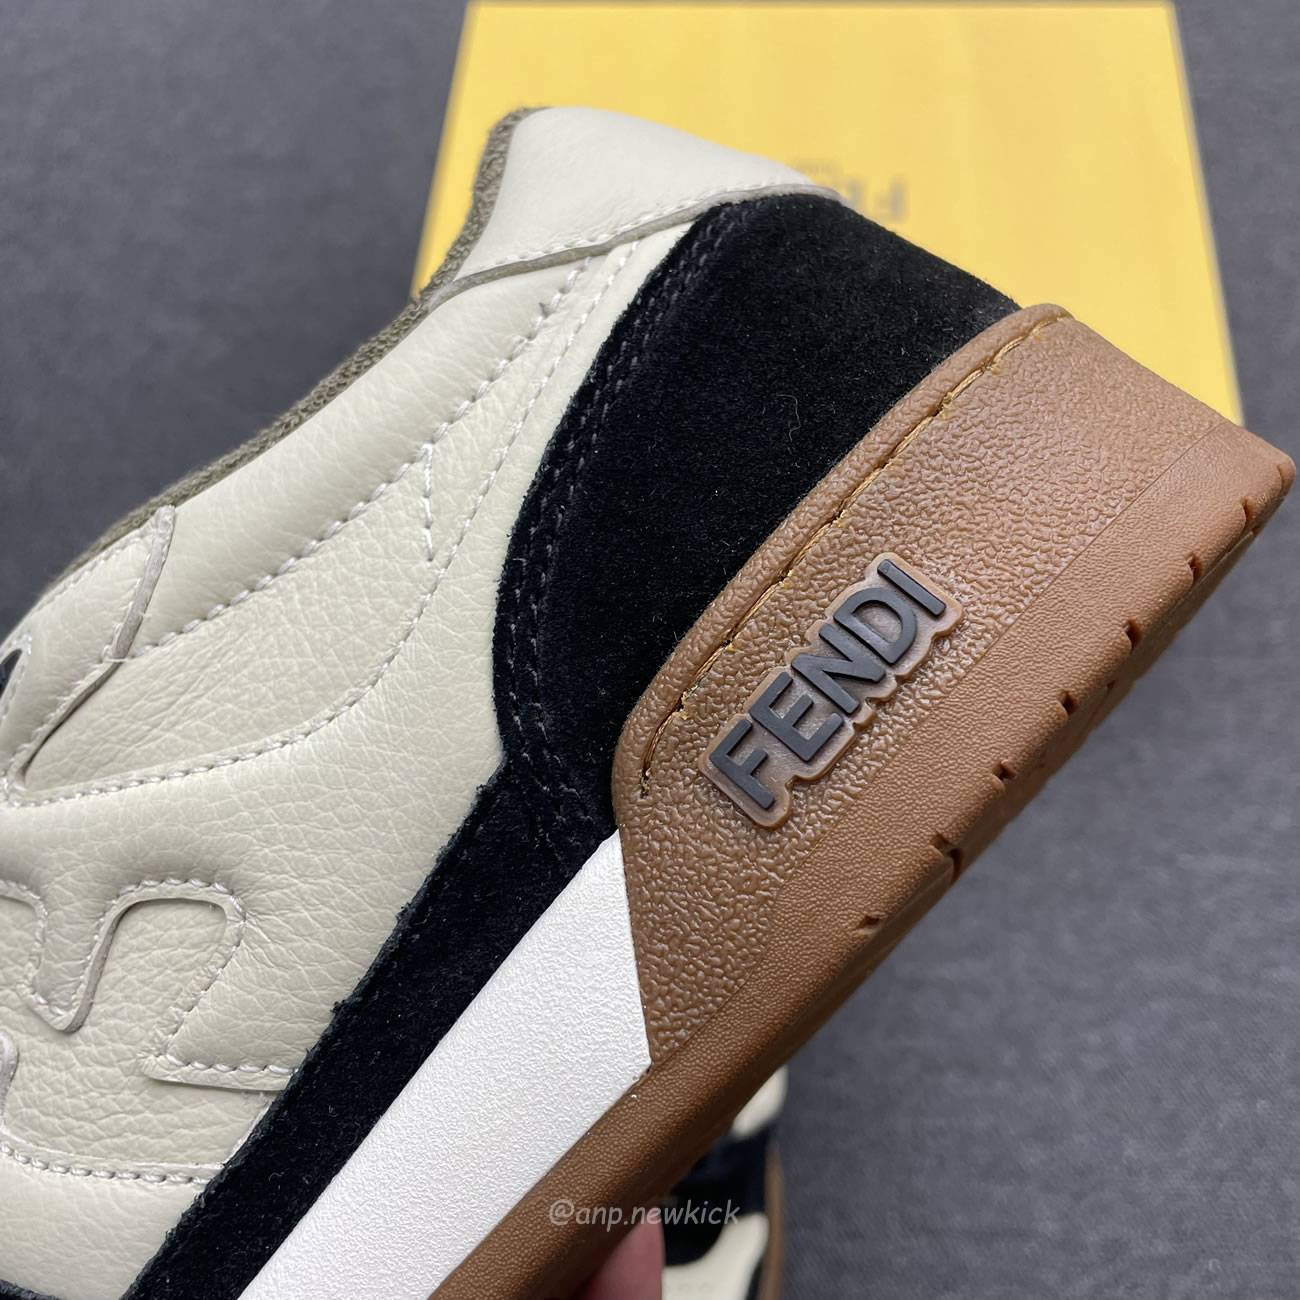 Fendi Match Cream Black White Suede And Leather Low Top Sneakers (10) - newkick.org